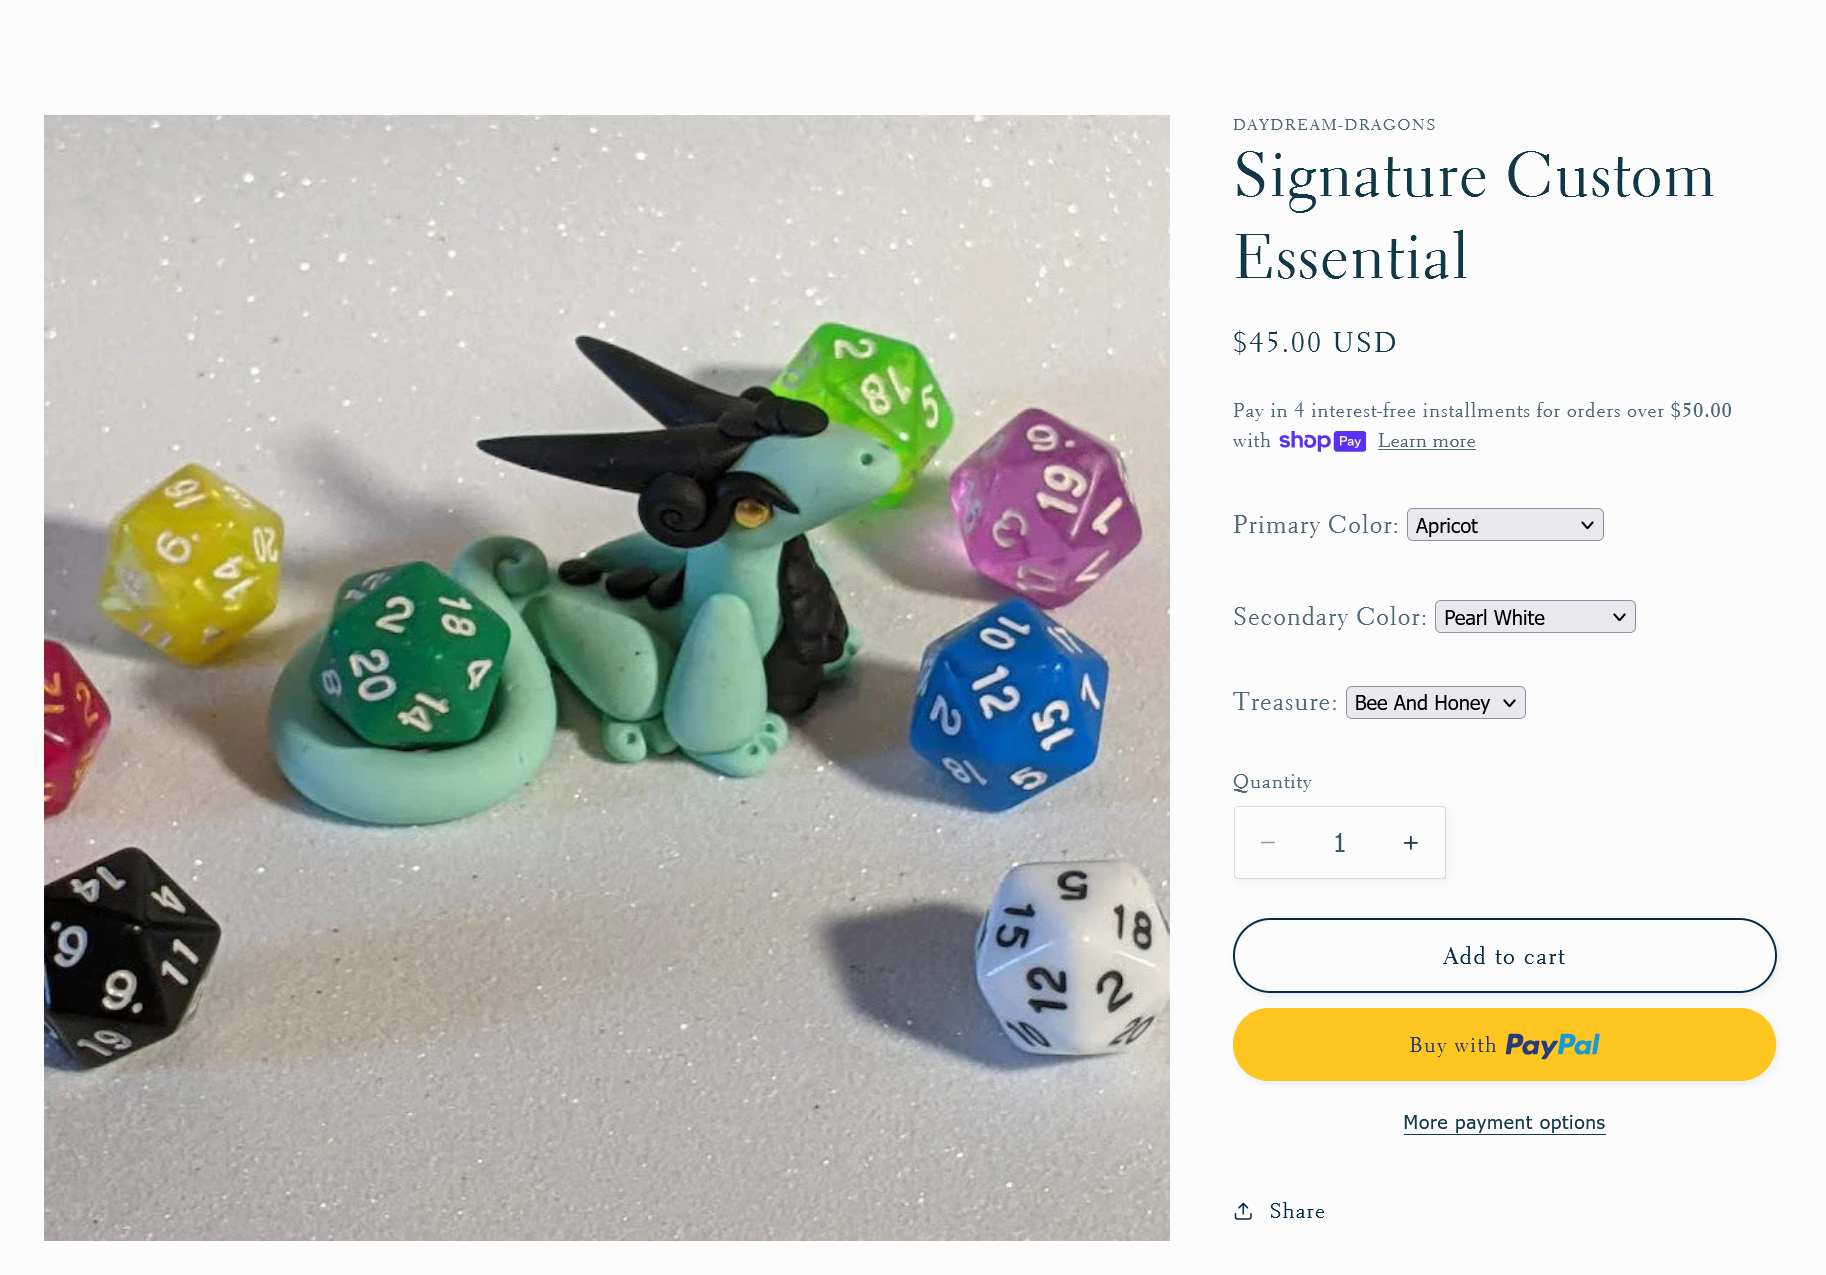 a local craftswoman's website that features cute handmade polymer clay dragons